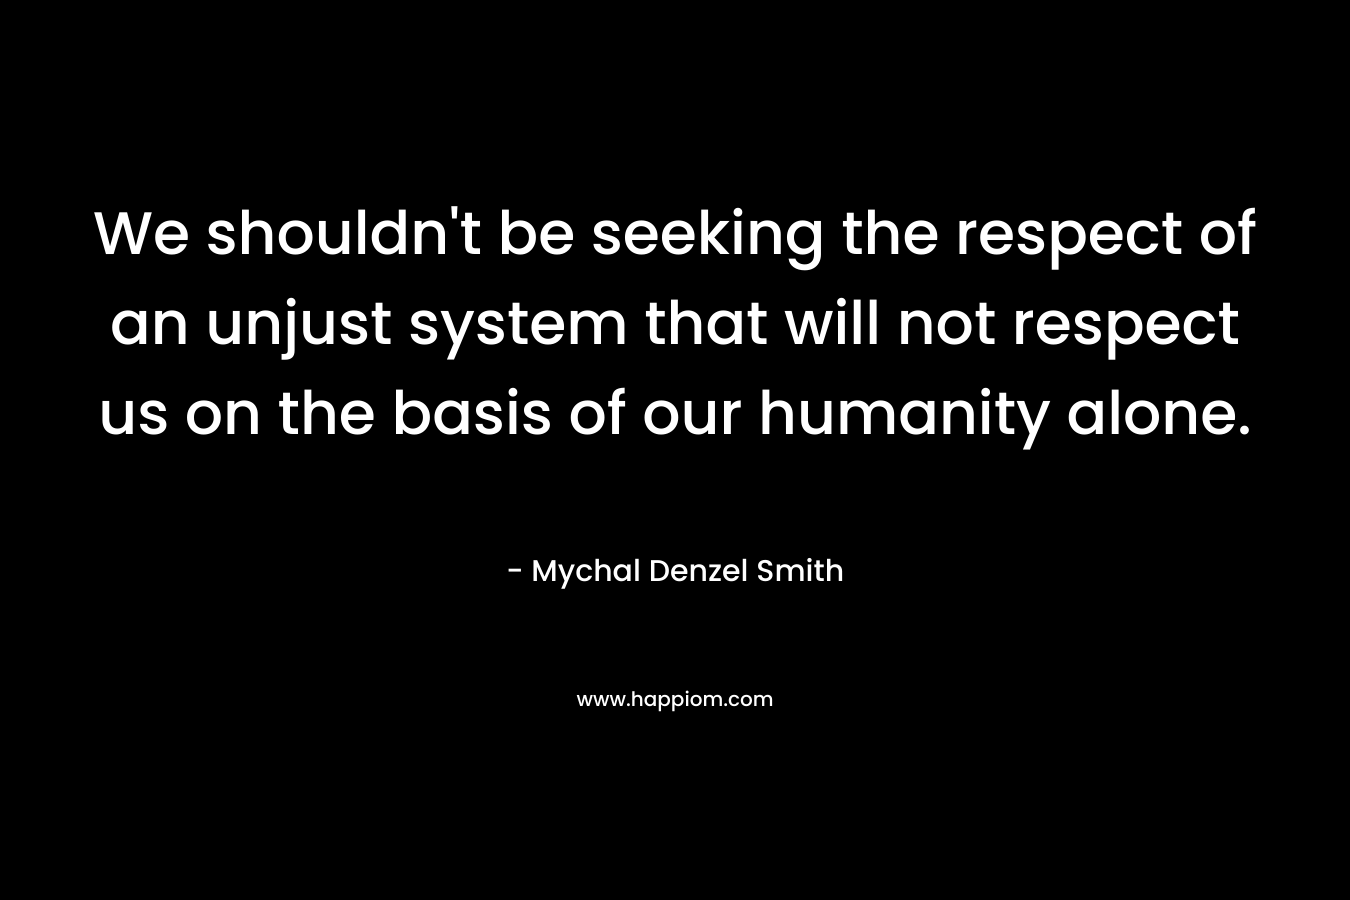 We shouldn't be seeking the respect of an unjust system that will not respect us on the basis of our humanity alone.